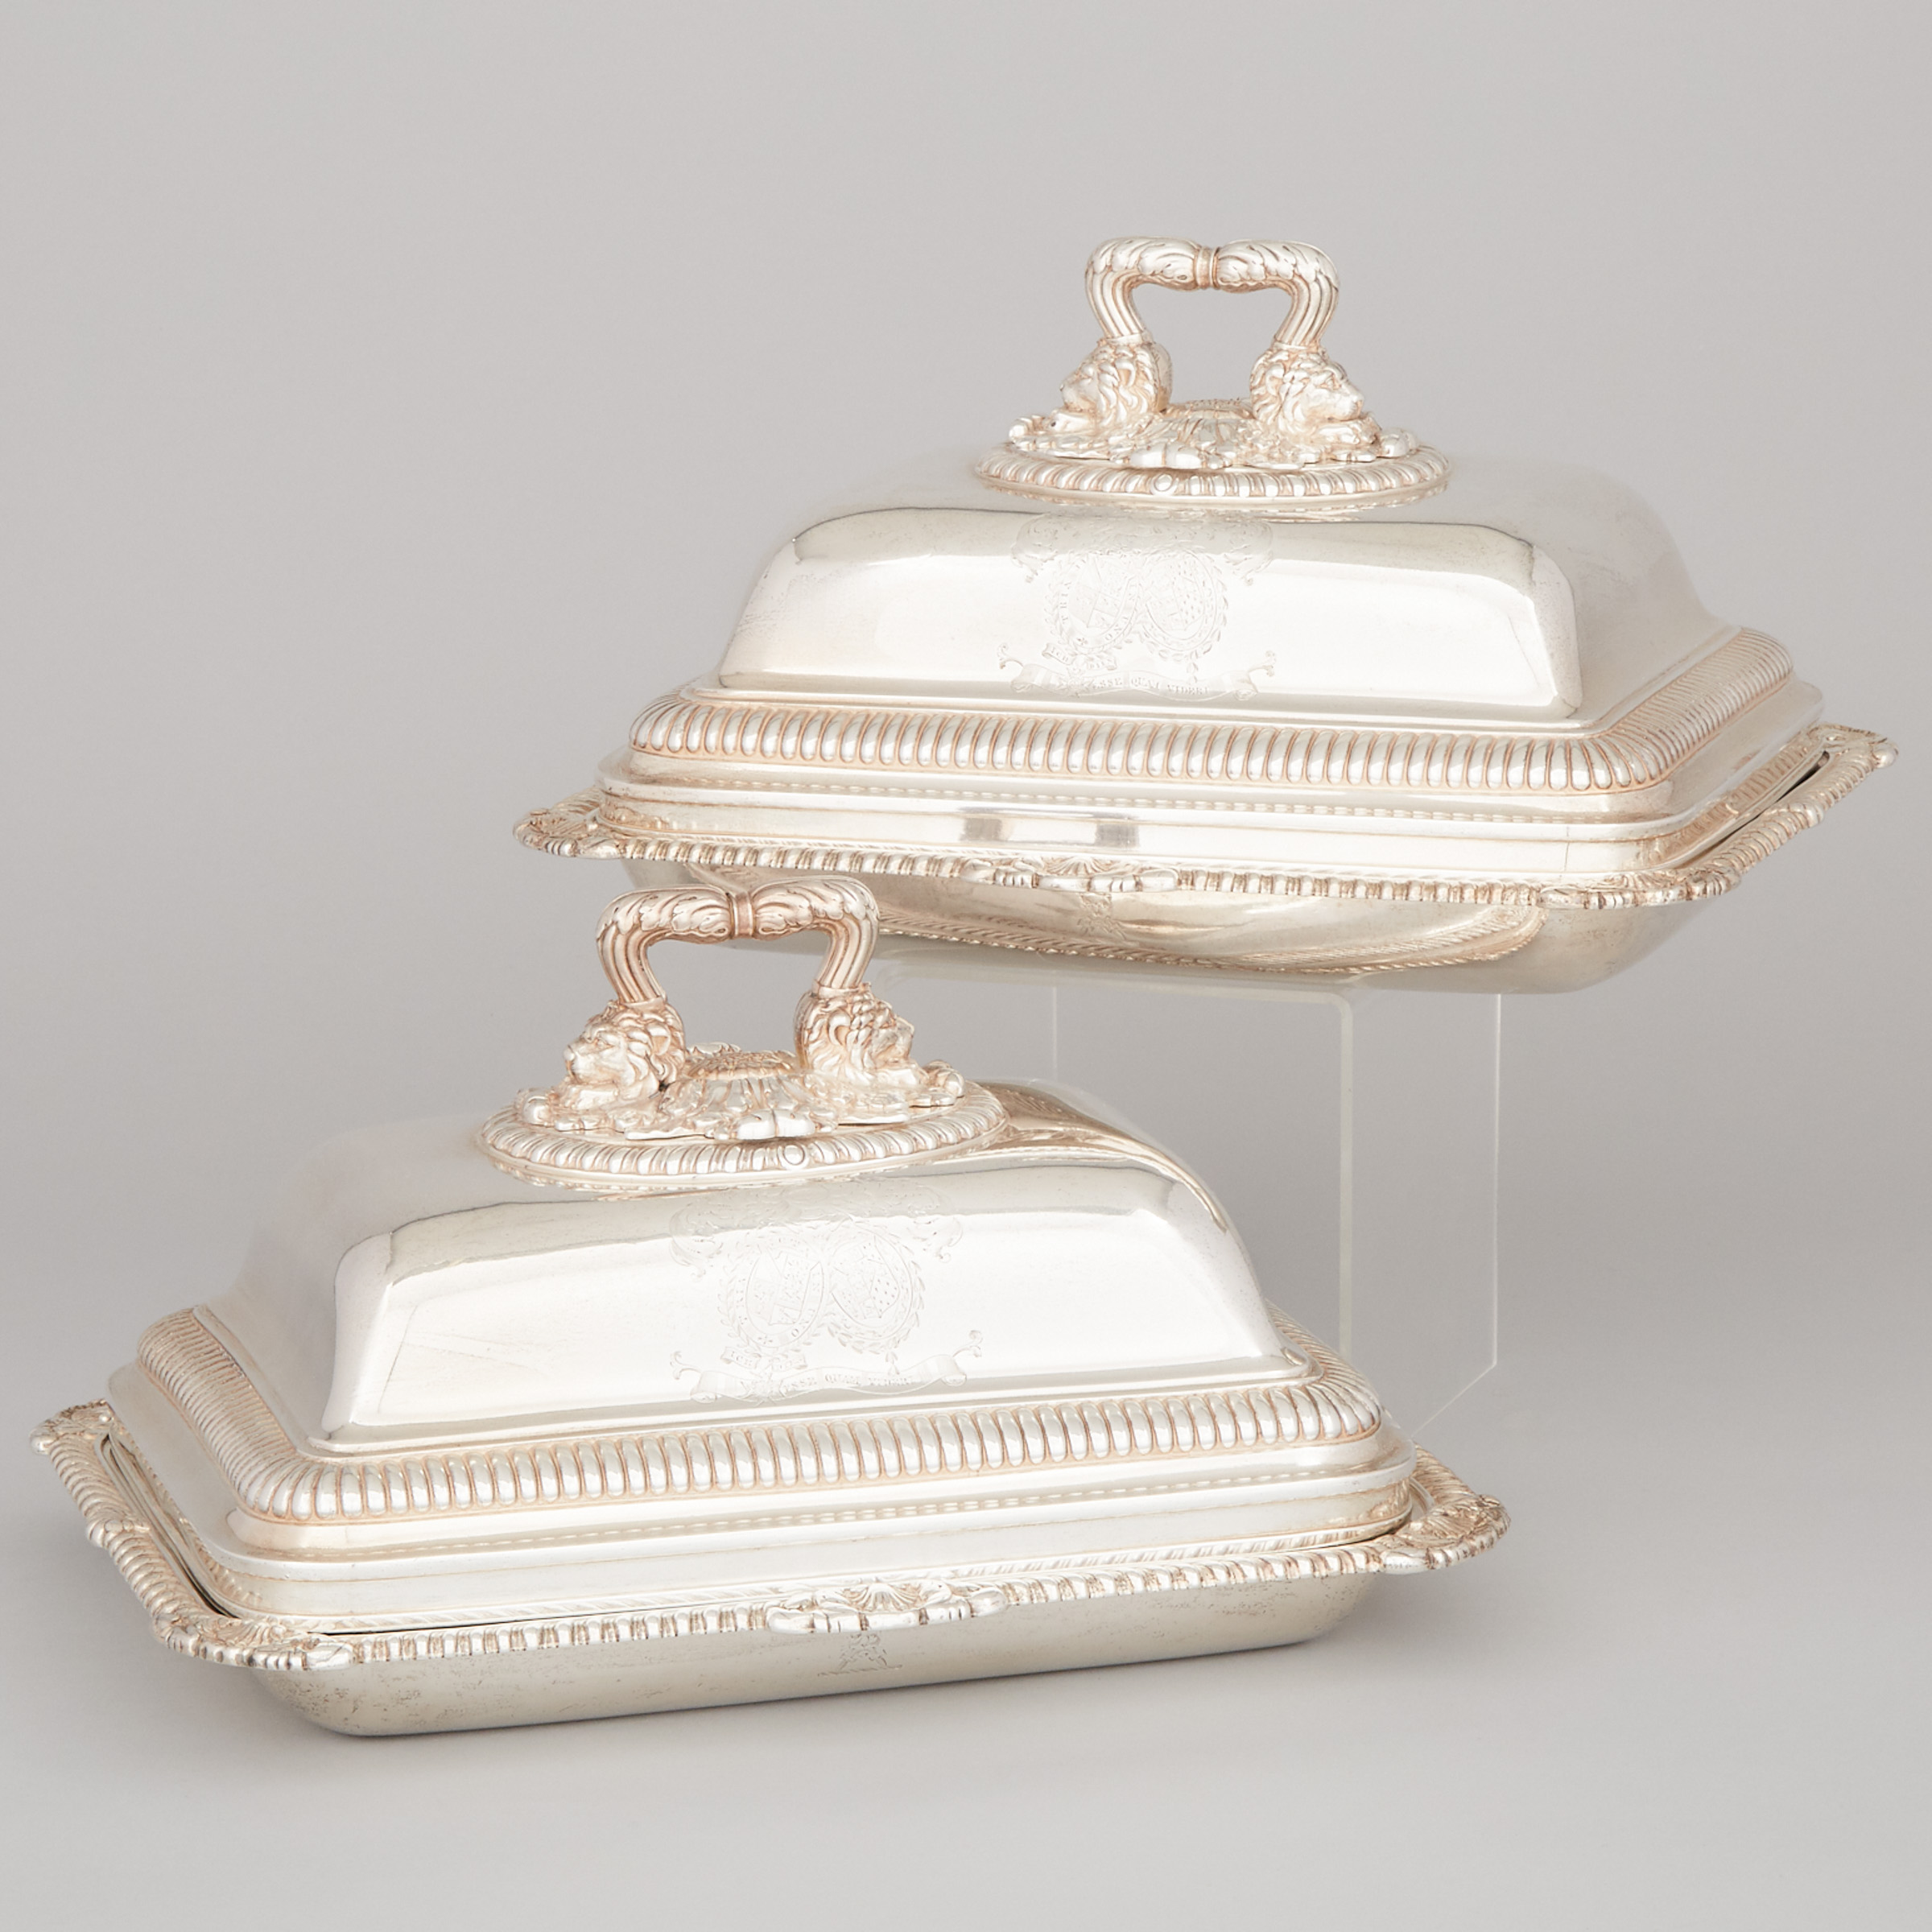 Pair of George IV Silver Entrée Dishes, Philip Rundell, London, 1821